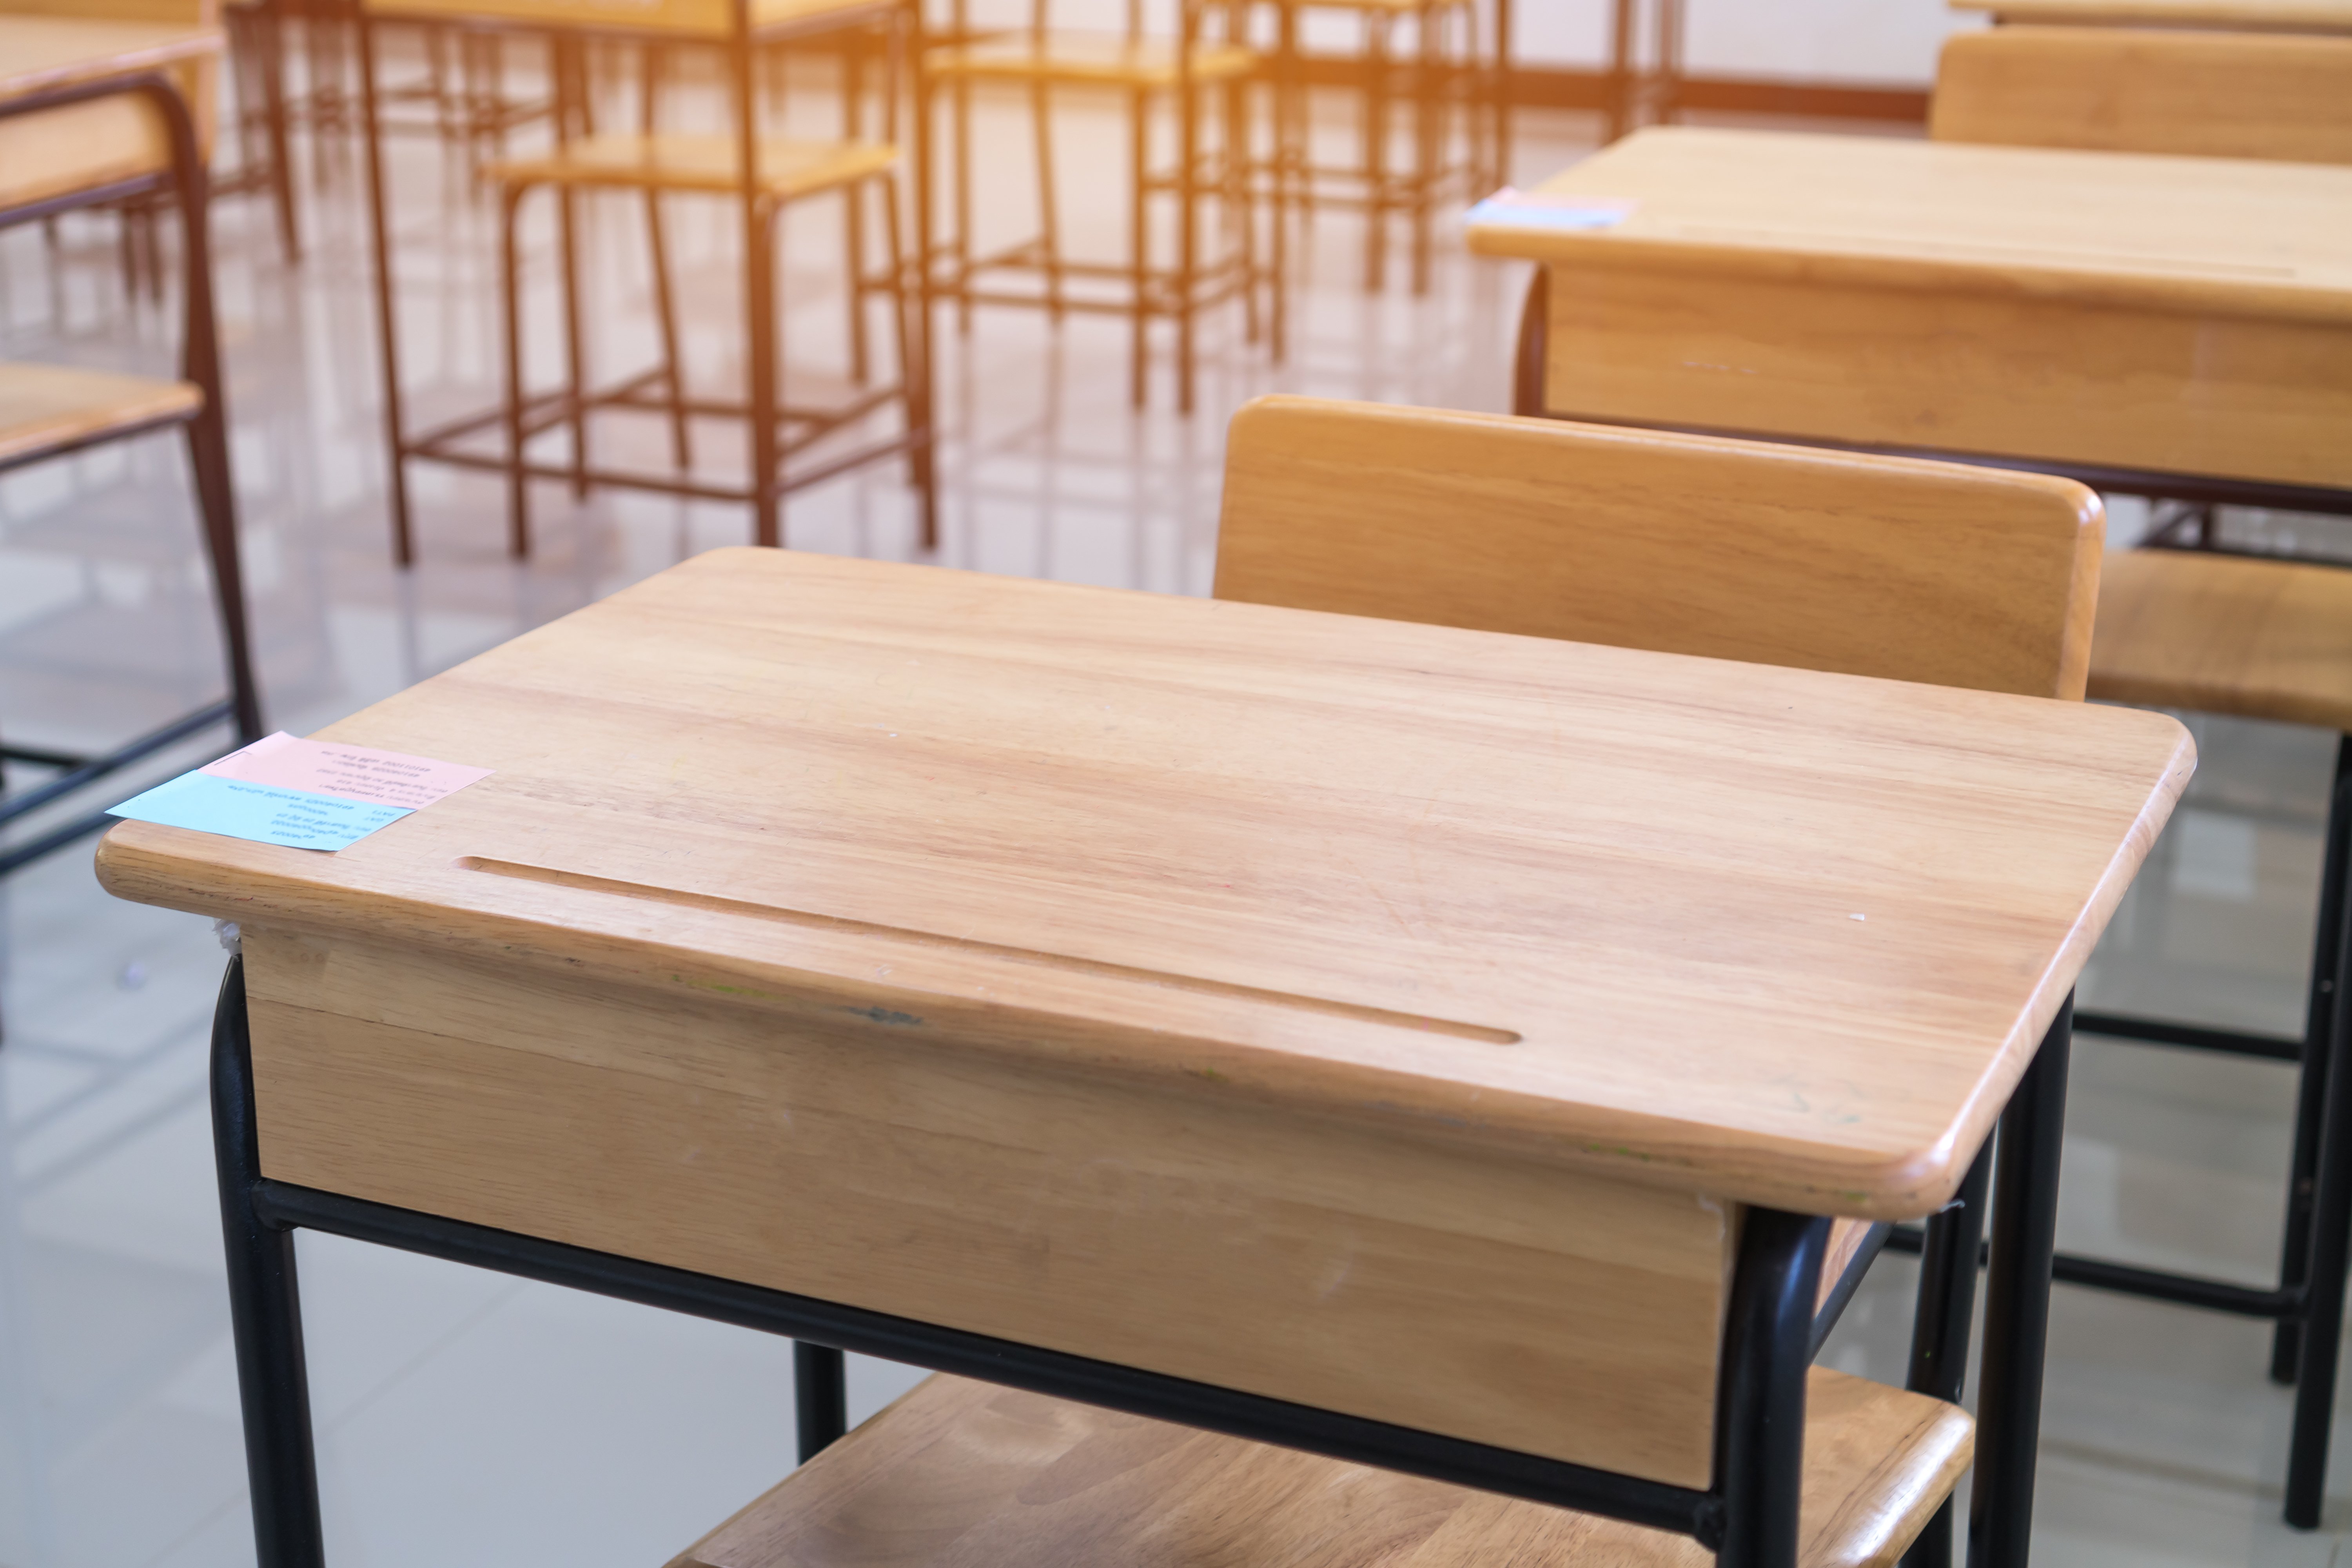 Getting chronically absent students back in the classroom